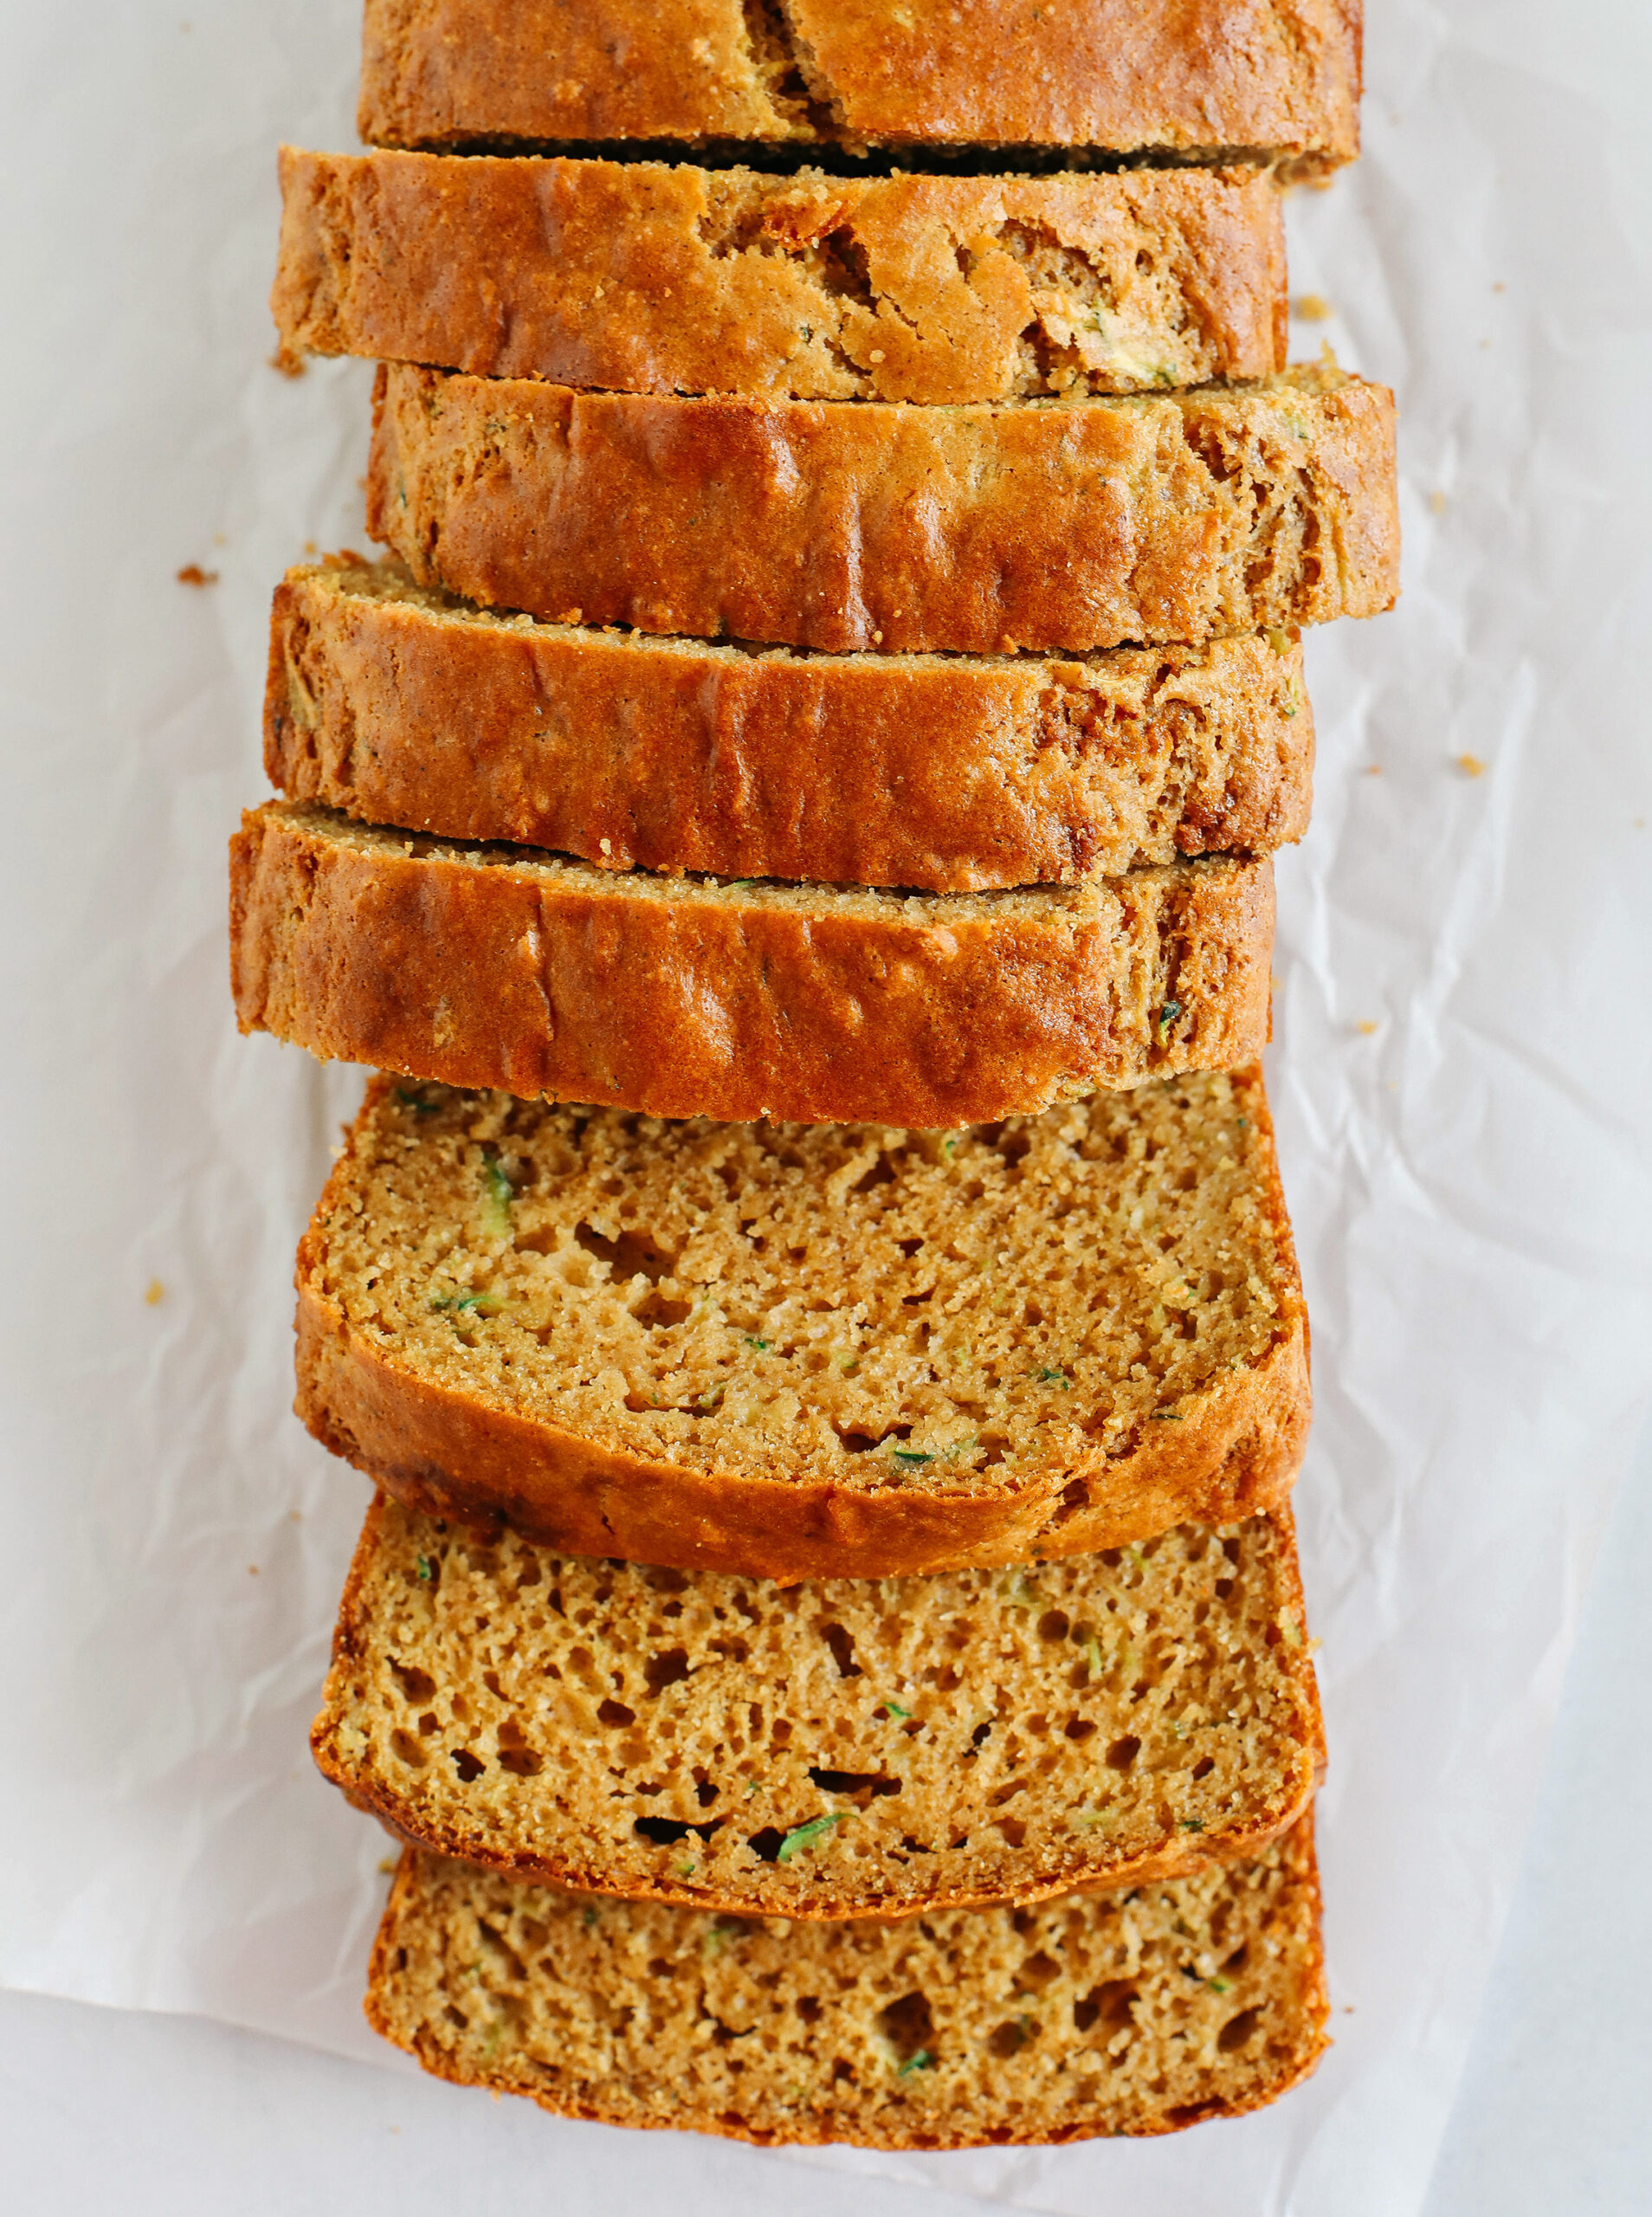 This Healthy Zucchini Bread is moist, fluffy, and made healthier with whole wheat flour, Greek yogurt, shredded zucchini and zero butter or refined sugar.  Perfect for breakfast or an easy snack!